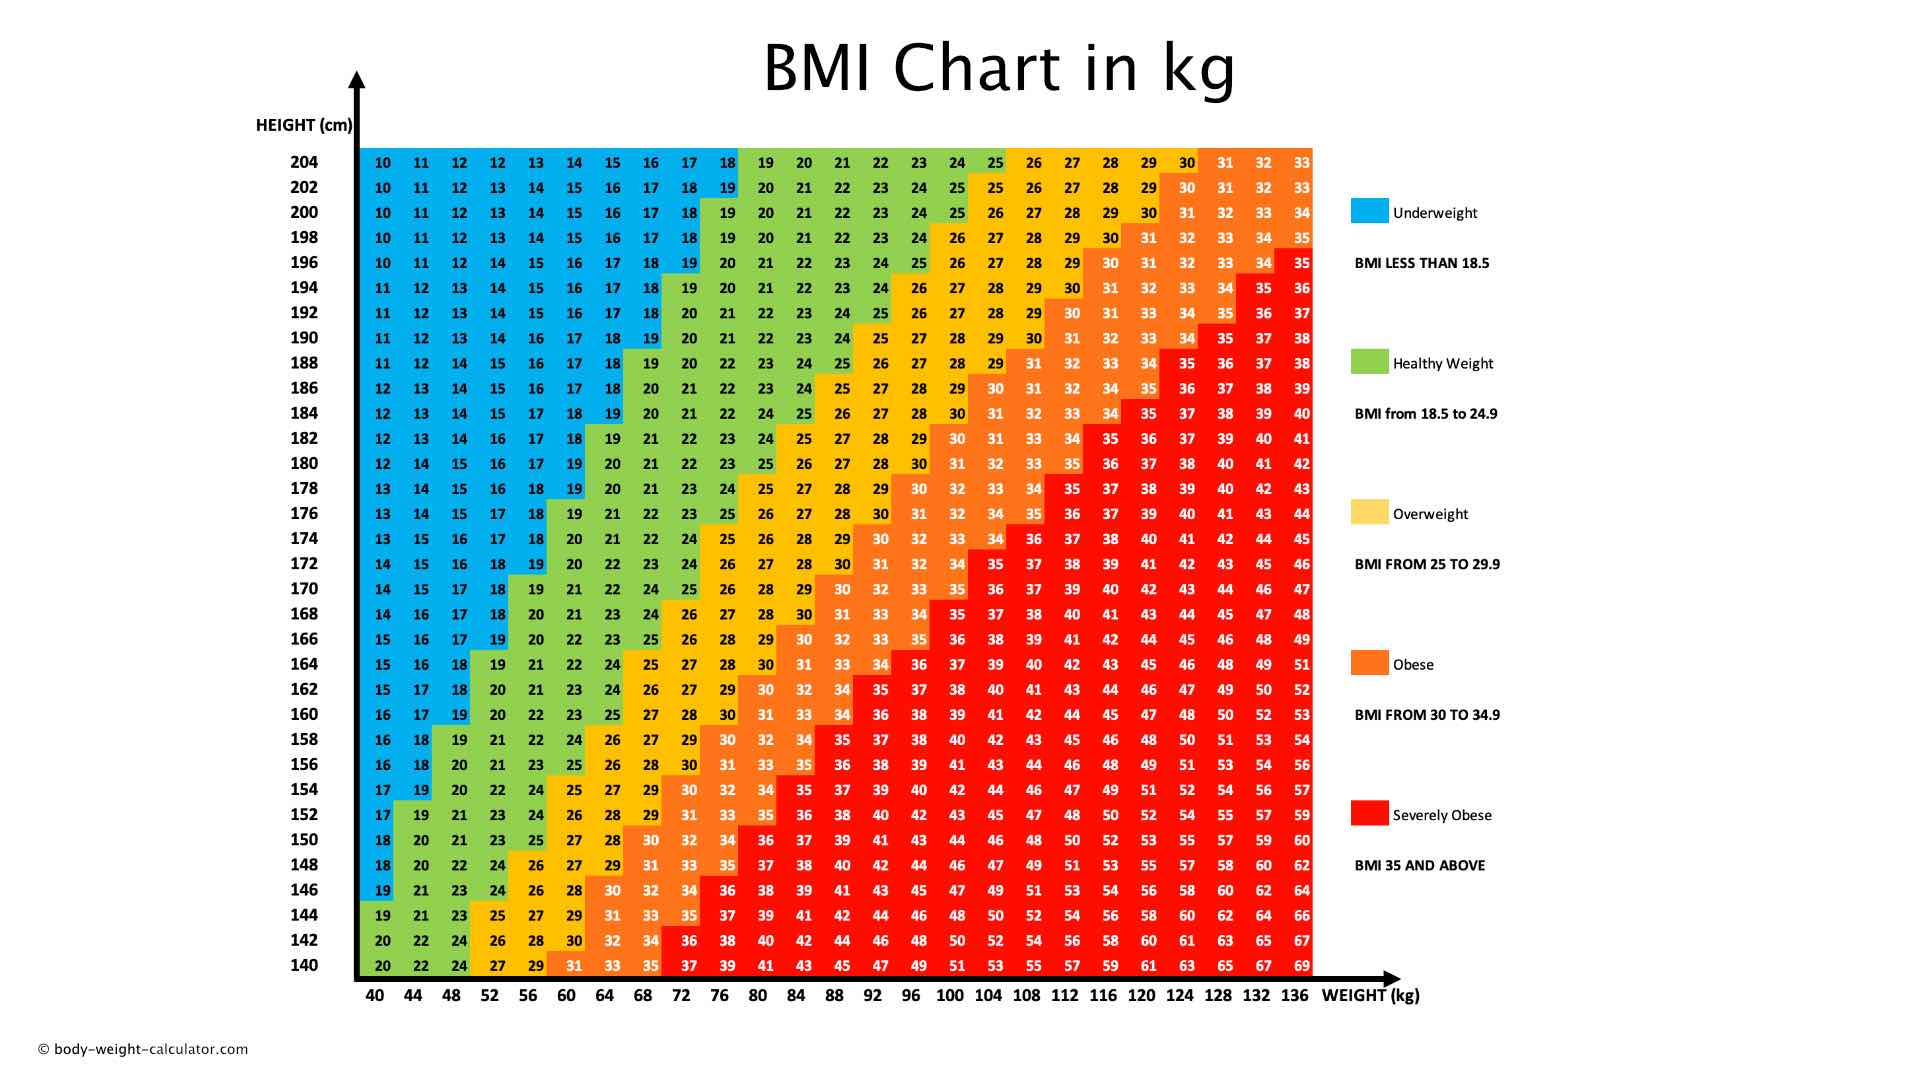 BMI chart for females by age in India - 2022